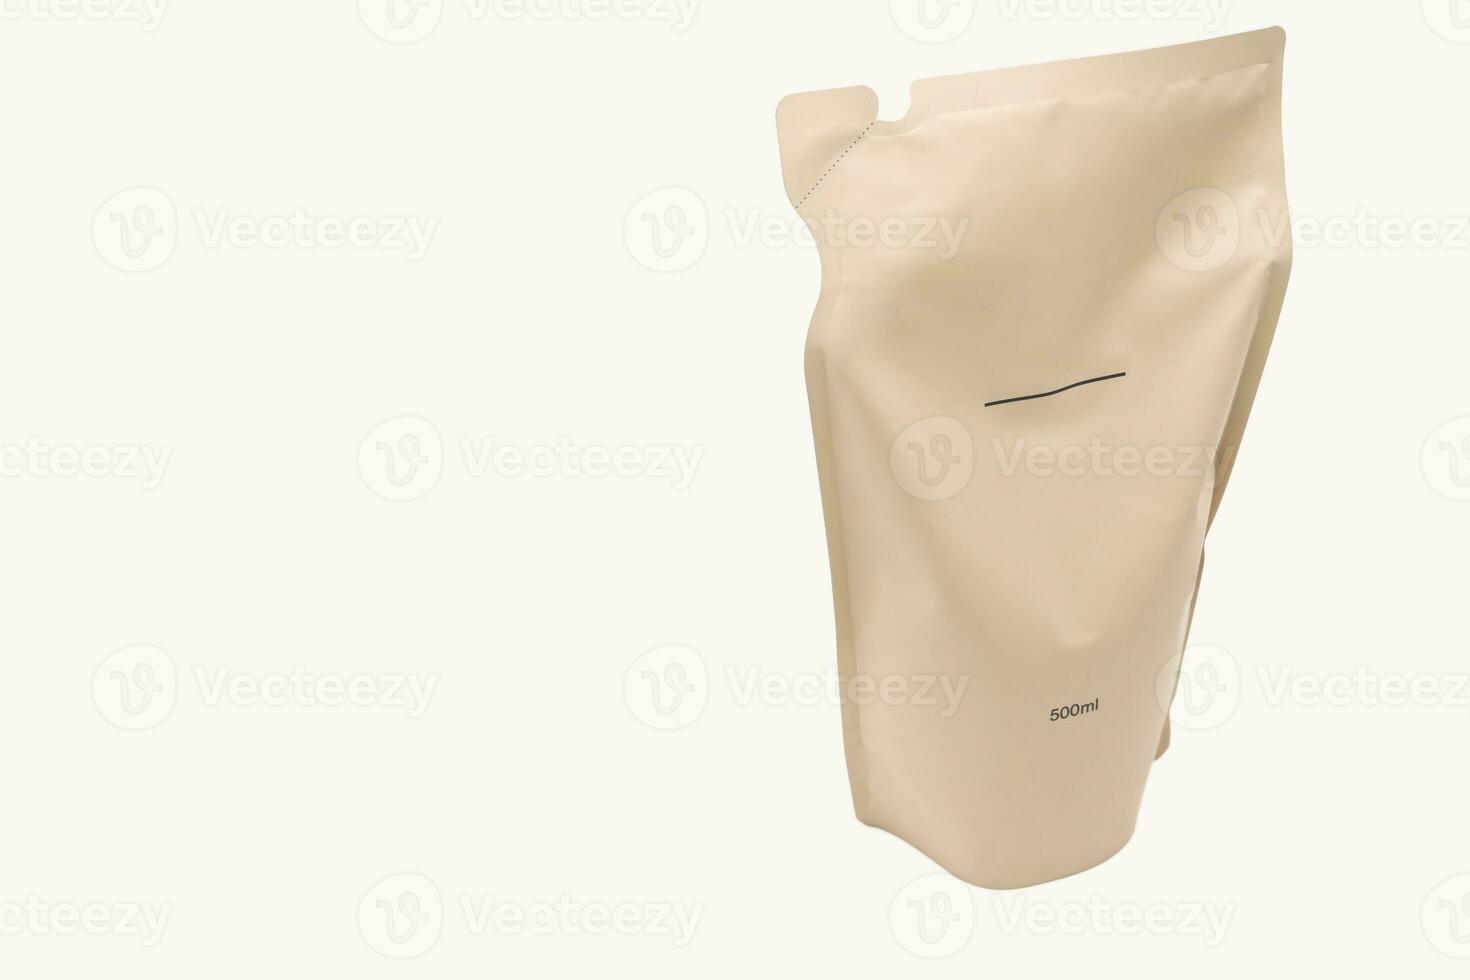 Refill packet or bag. Zero waste. Reuse reduce recycle concept. refill liquid soap, shampoo and other products. Plastic packaging for refill pouch isolated on white background with clipping path. photo